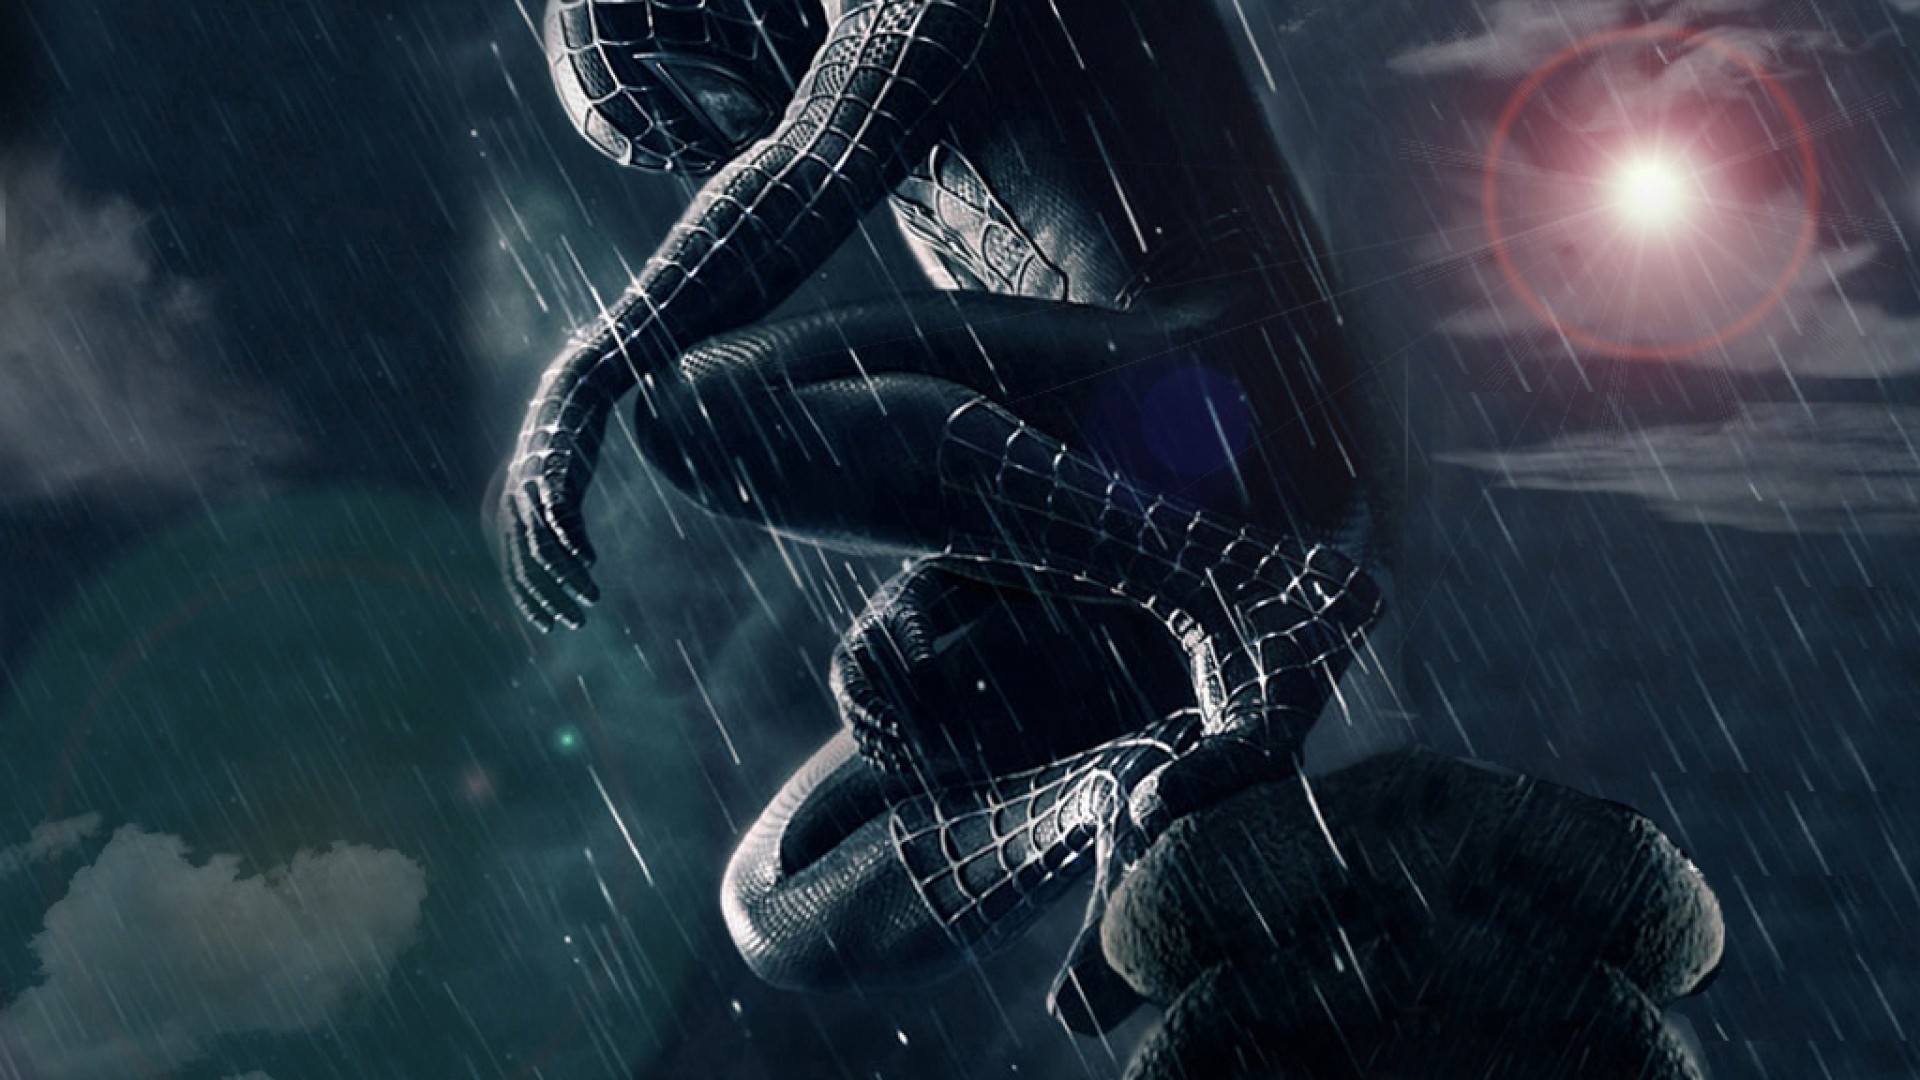 spiderman hd wallpaper 1920x1080,action adventure game,cg artwork,fictional character,digital compositing,space